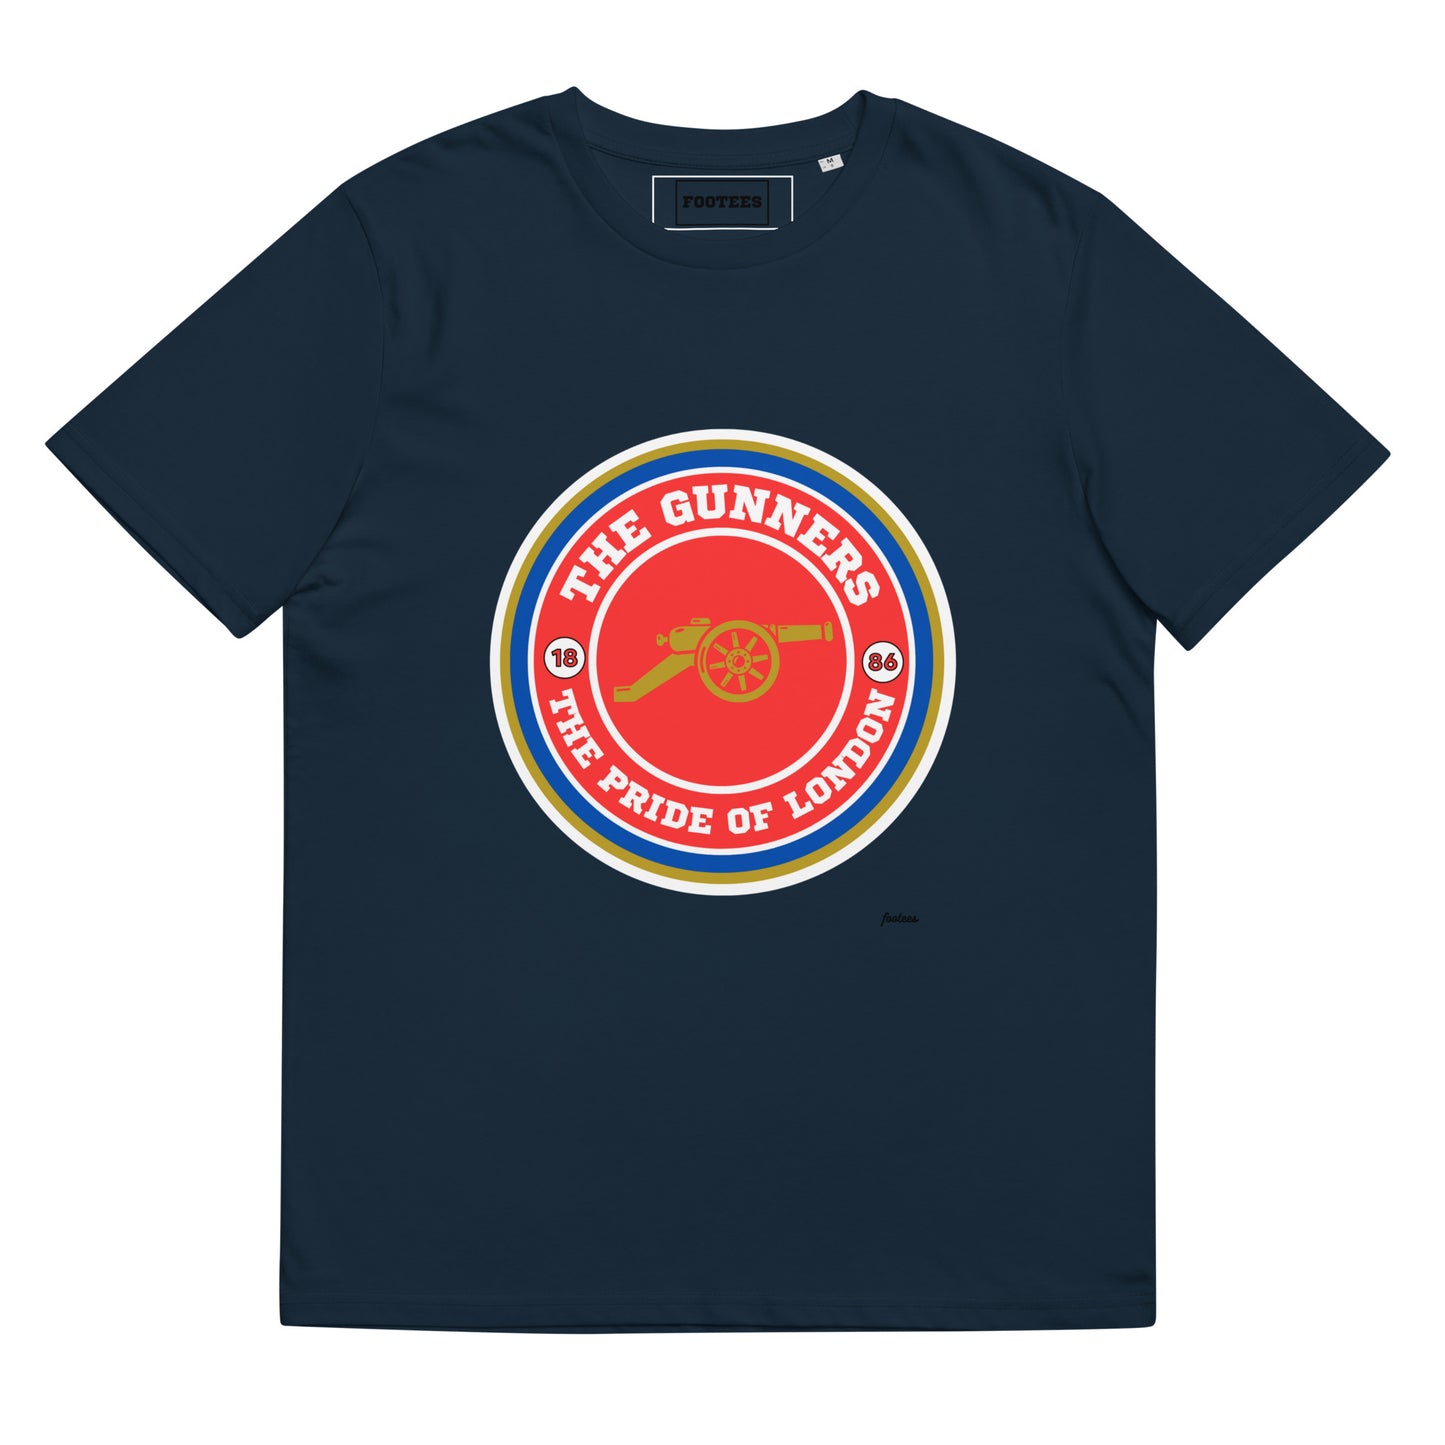 The Pride of London AFC Tee